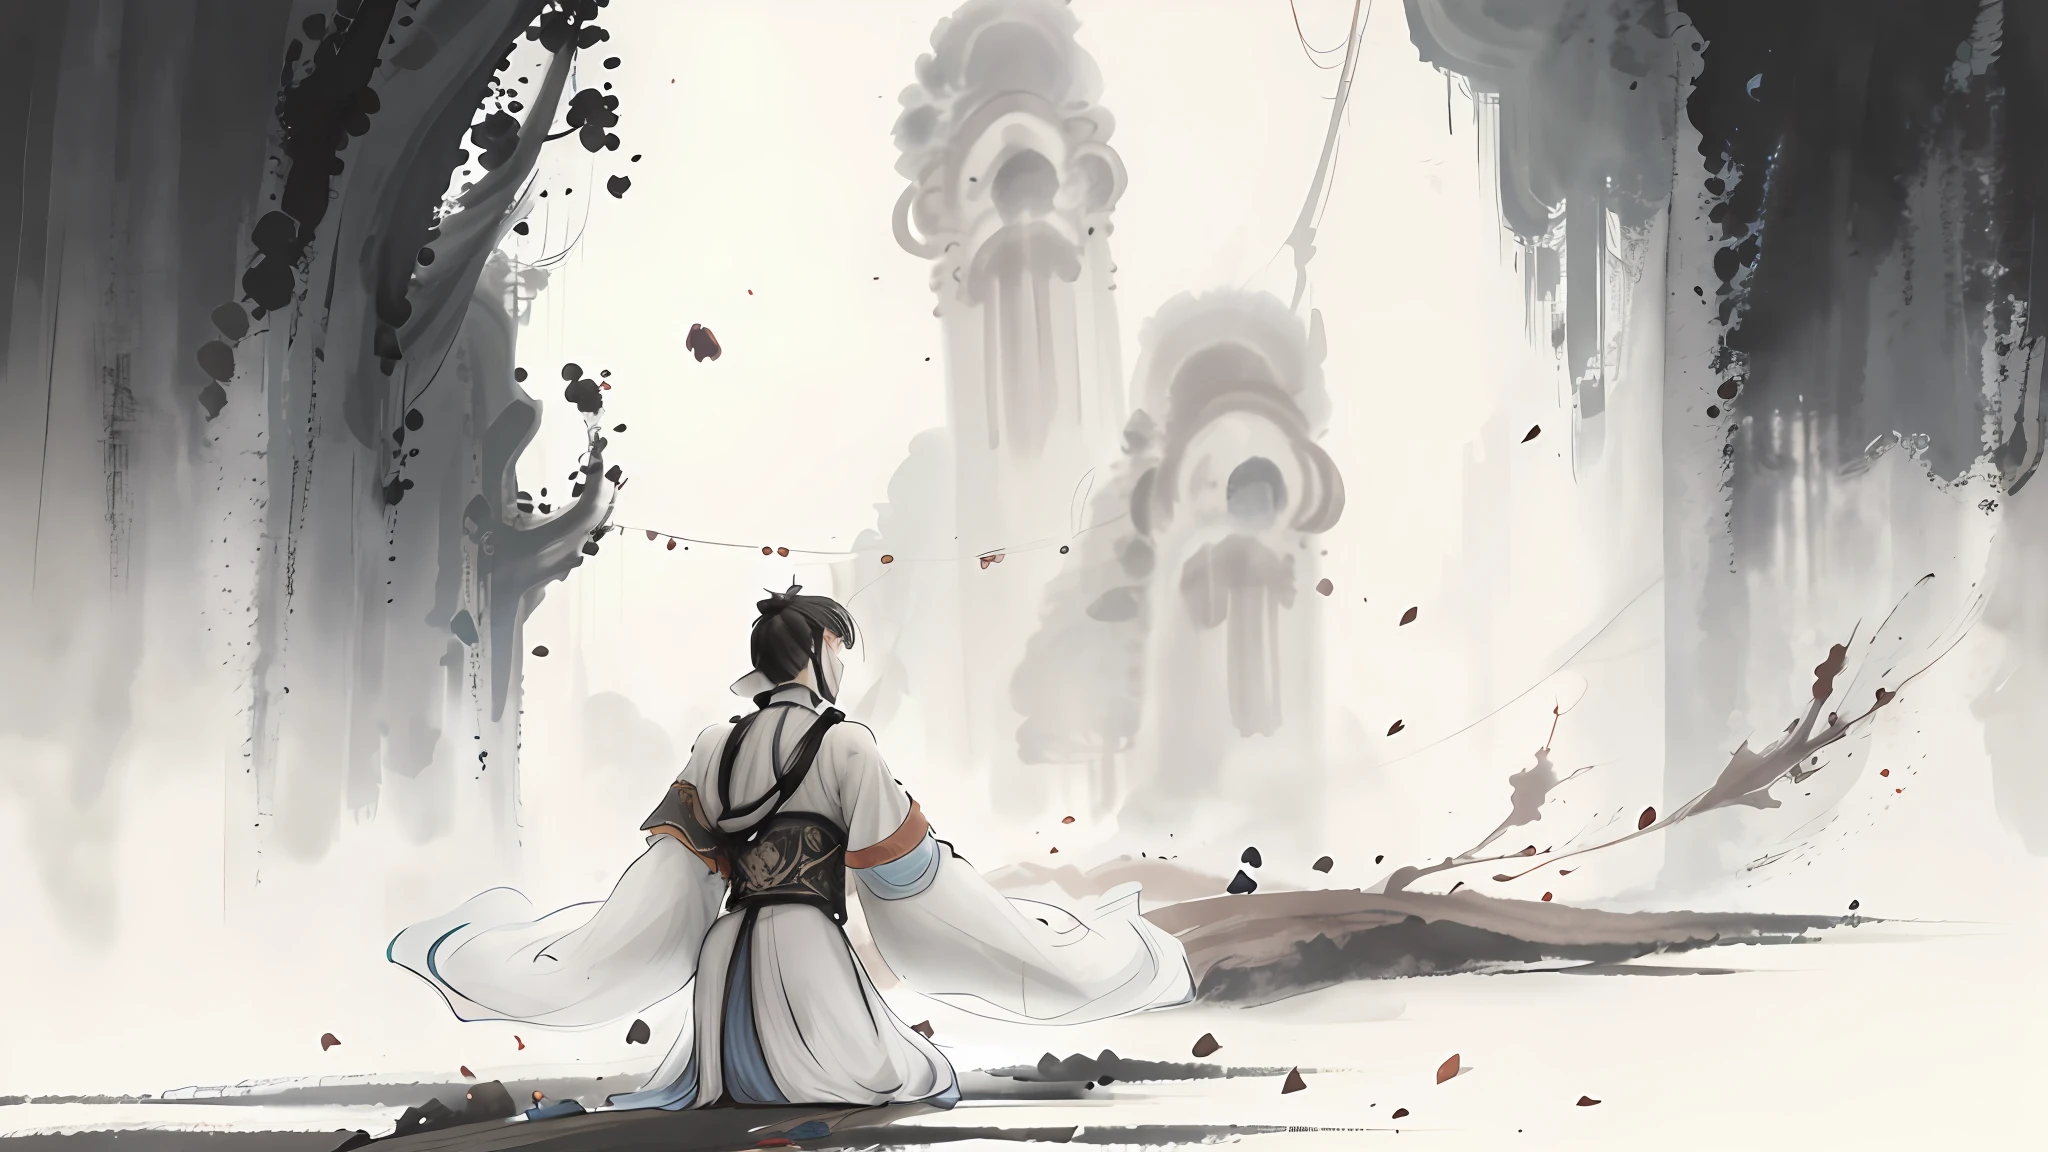 There is an ancient Chinese man in a white robe who meditates cross-legged，backs facing each other。，Surrounded by a spell aperture，Gossip background，Ink wind，A puddle of ink on the ground，Inspired by Seki Dosheng, ruan jia and joao ruas, inspired by Fu Baoshi, inspired by Wu Daozi, Inspired by Xiao Yuncong, Inspired by Cao Zhibai, inspired by Gong Xian, inspired by Lü Ji, inspired by Zhao Mengfu